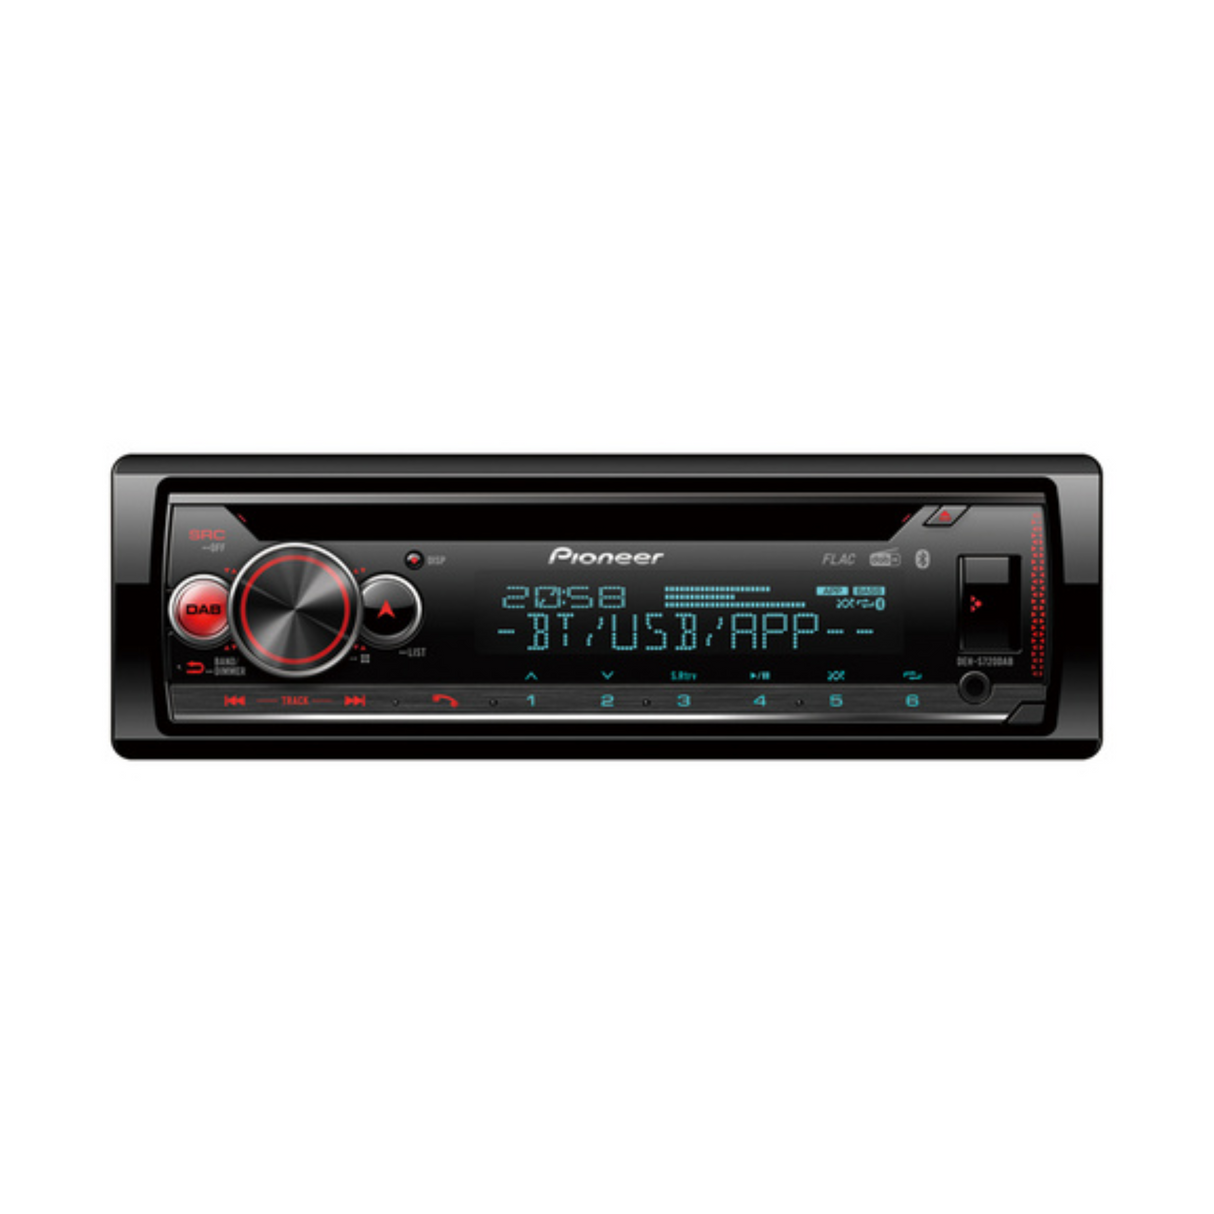 Pioneer DEH-S720DAB Single Din CD Tuner with DAB/DAB+, Bluetooth, USB and Spotify